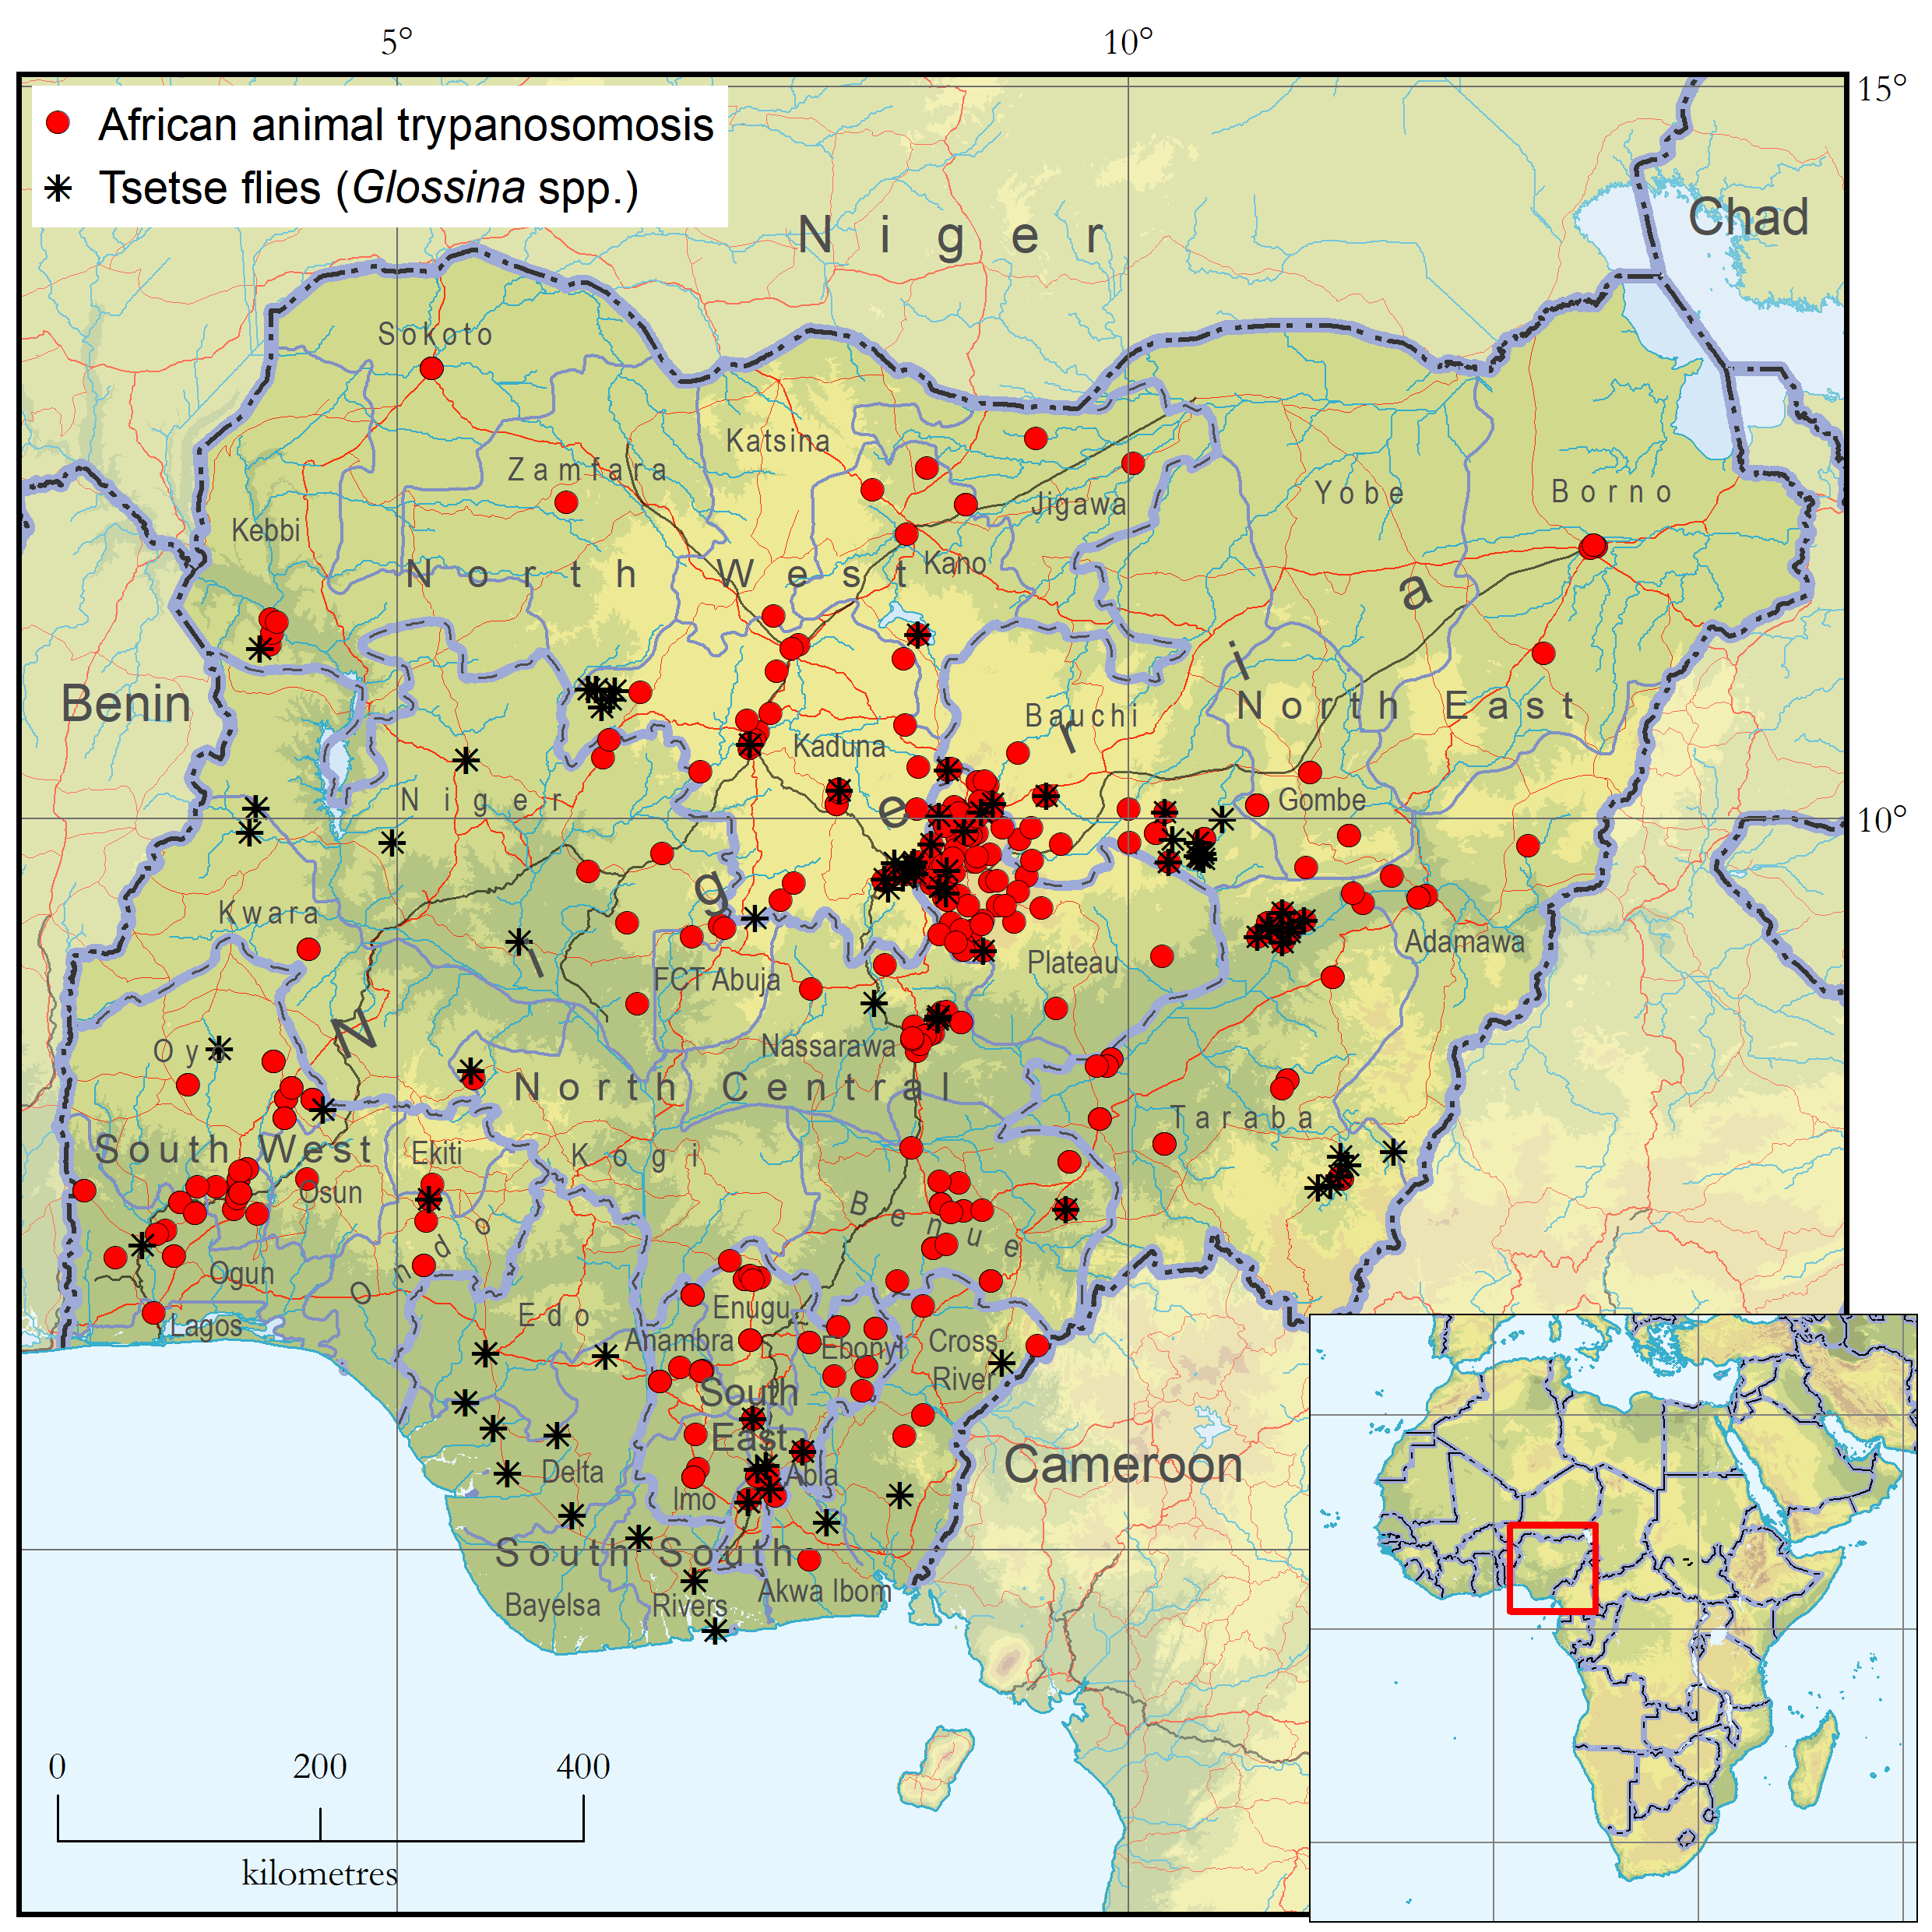 Developing National Atlases of Tsetse and African Animal Trypanosomosis